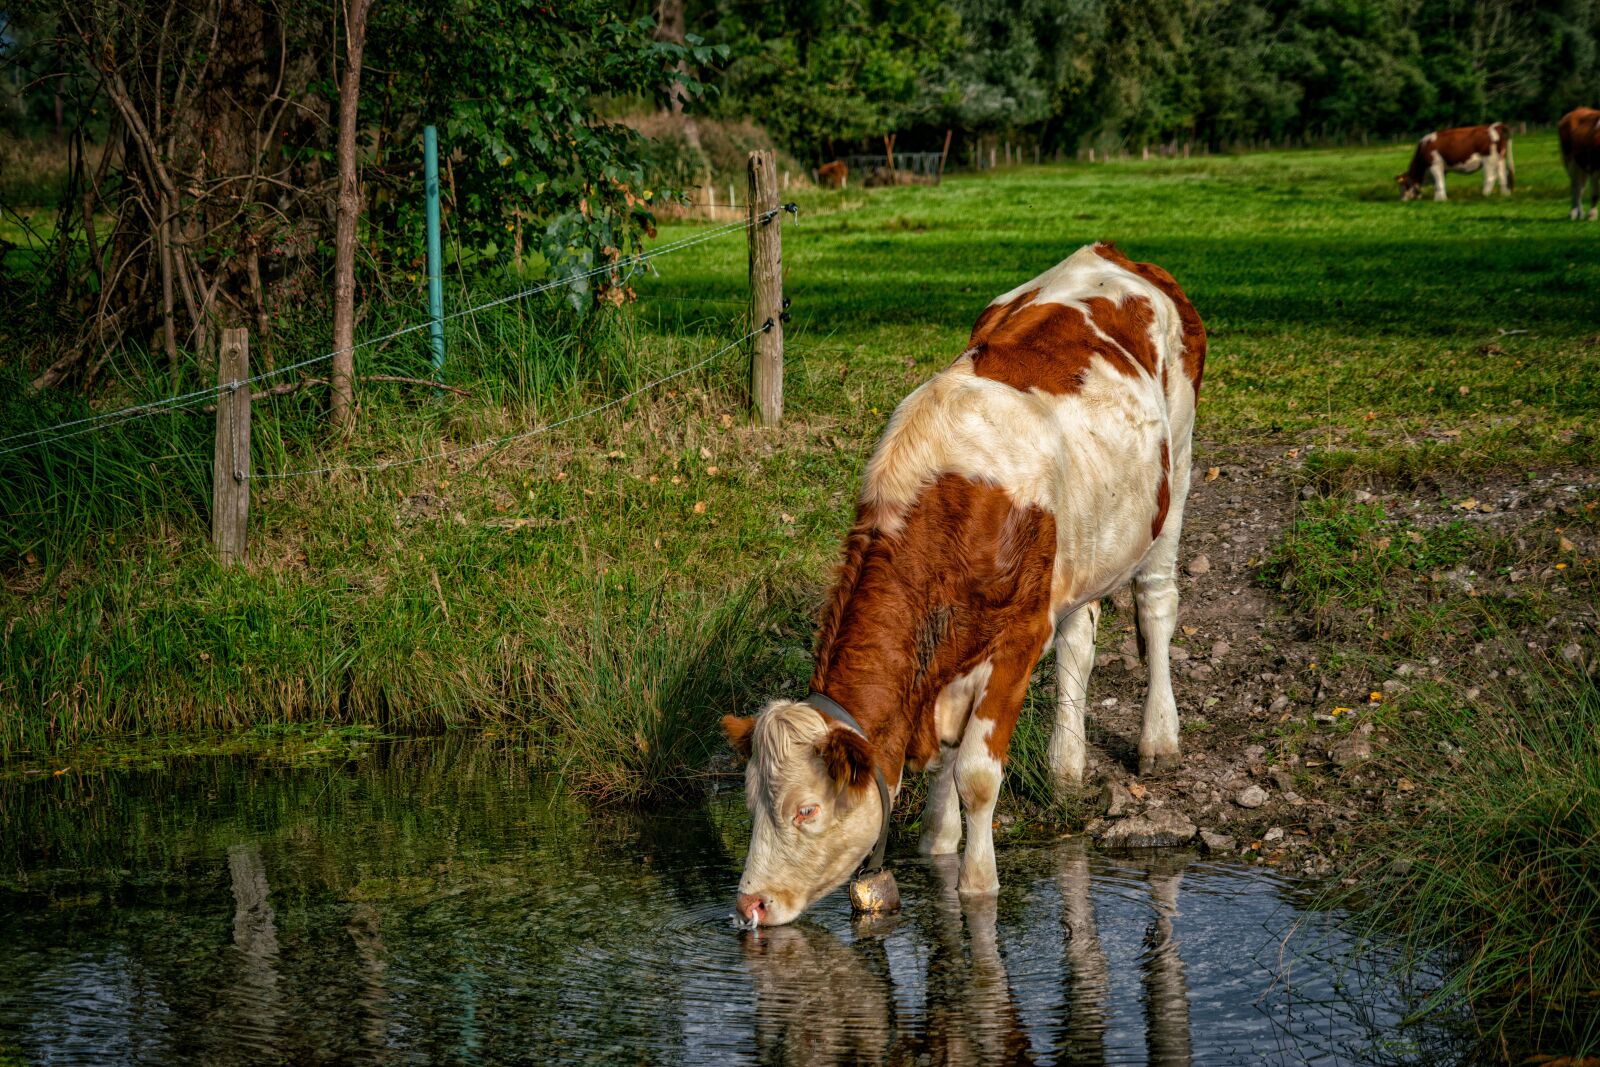 Sony a7R II sample photo. Cow, nature, water photography